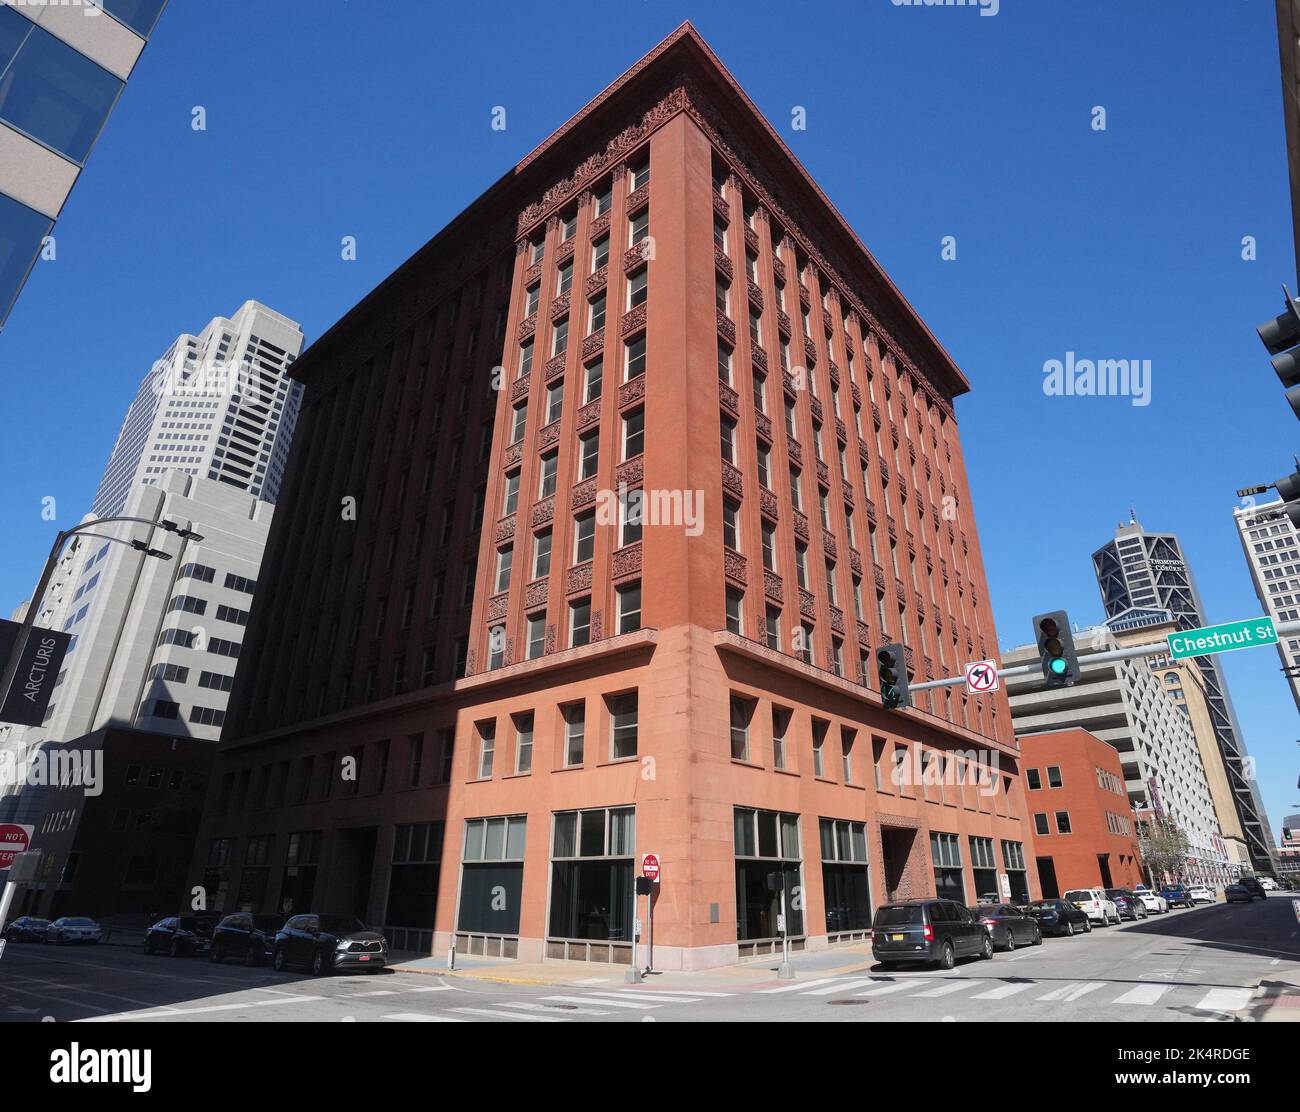 St. Louis, United States. 03rd July, 2022. The Wainwright State Office Building, a 10-story, terra cotta office building in downtown St. Louis, shown on World Architecture Day on October 3, 2022. The Wainwright Building is considered to be one of the first skyscrapers and was designed by Dankmar Adler and Louis Sullivan, built between 1890 and 1891. World Architecture Day was created in 1985 as a celebration of architecture. Photo by Bill Greenblatt/UPI Credit: UPI/Alamy Live News Stock Photo